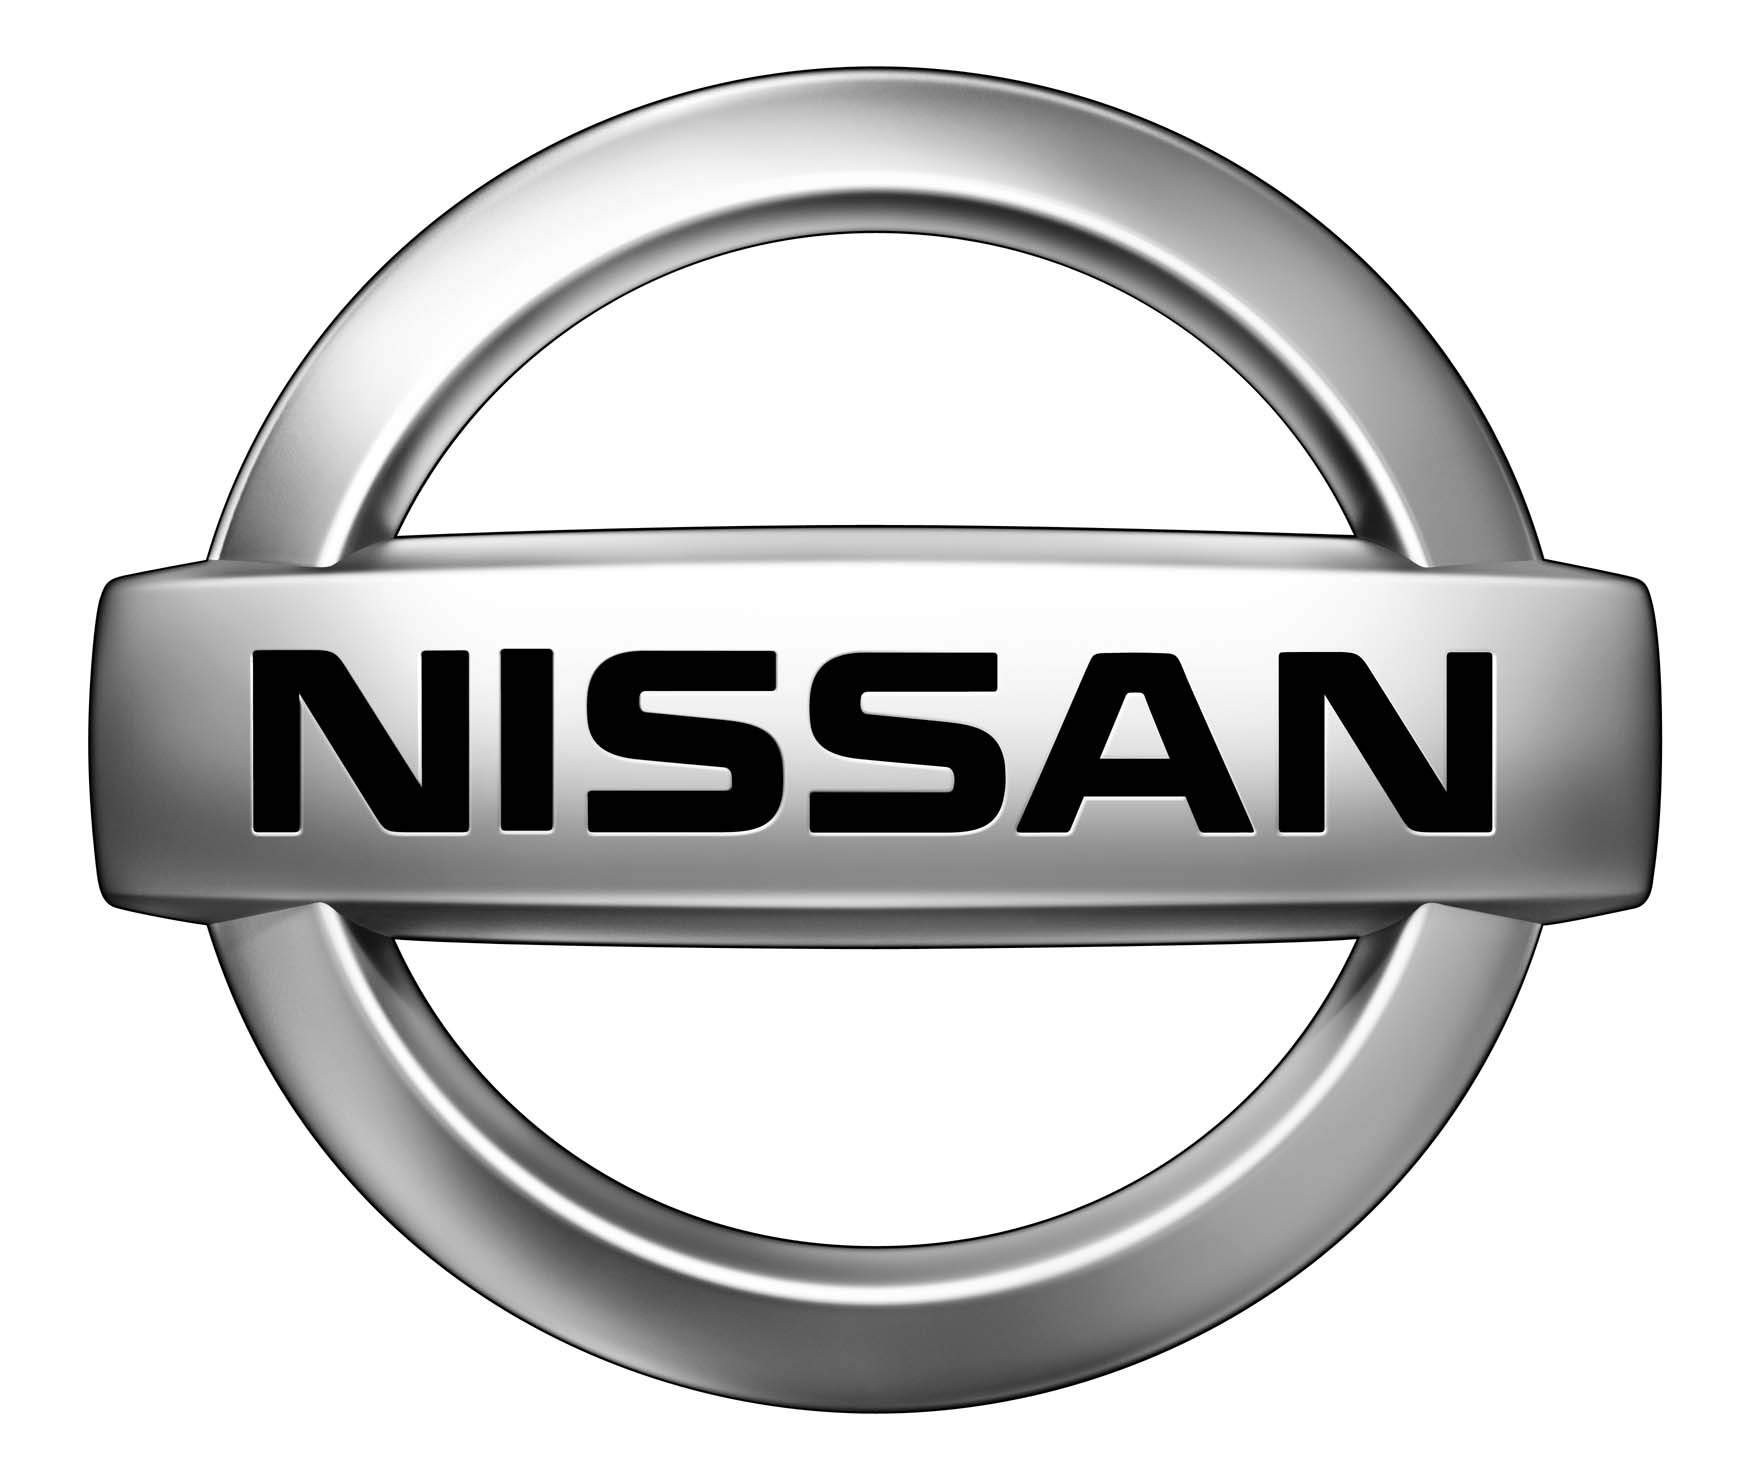 The advantage of sourcing from low-cost competitive countries is that Nissan 